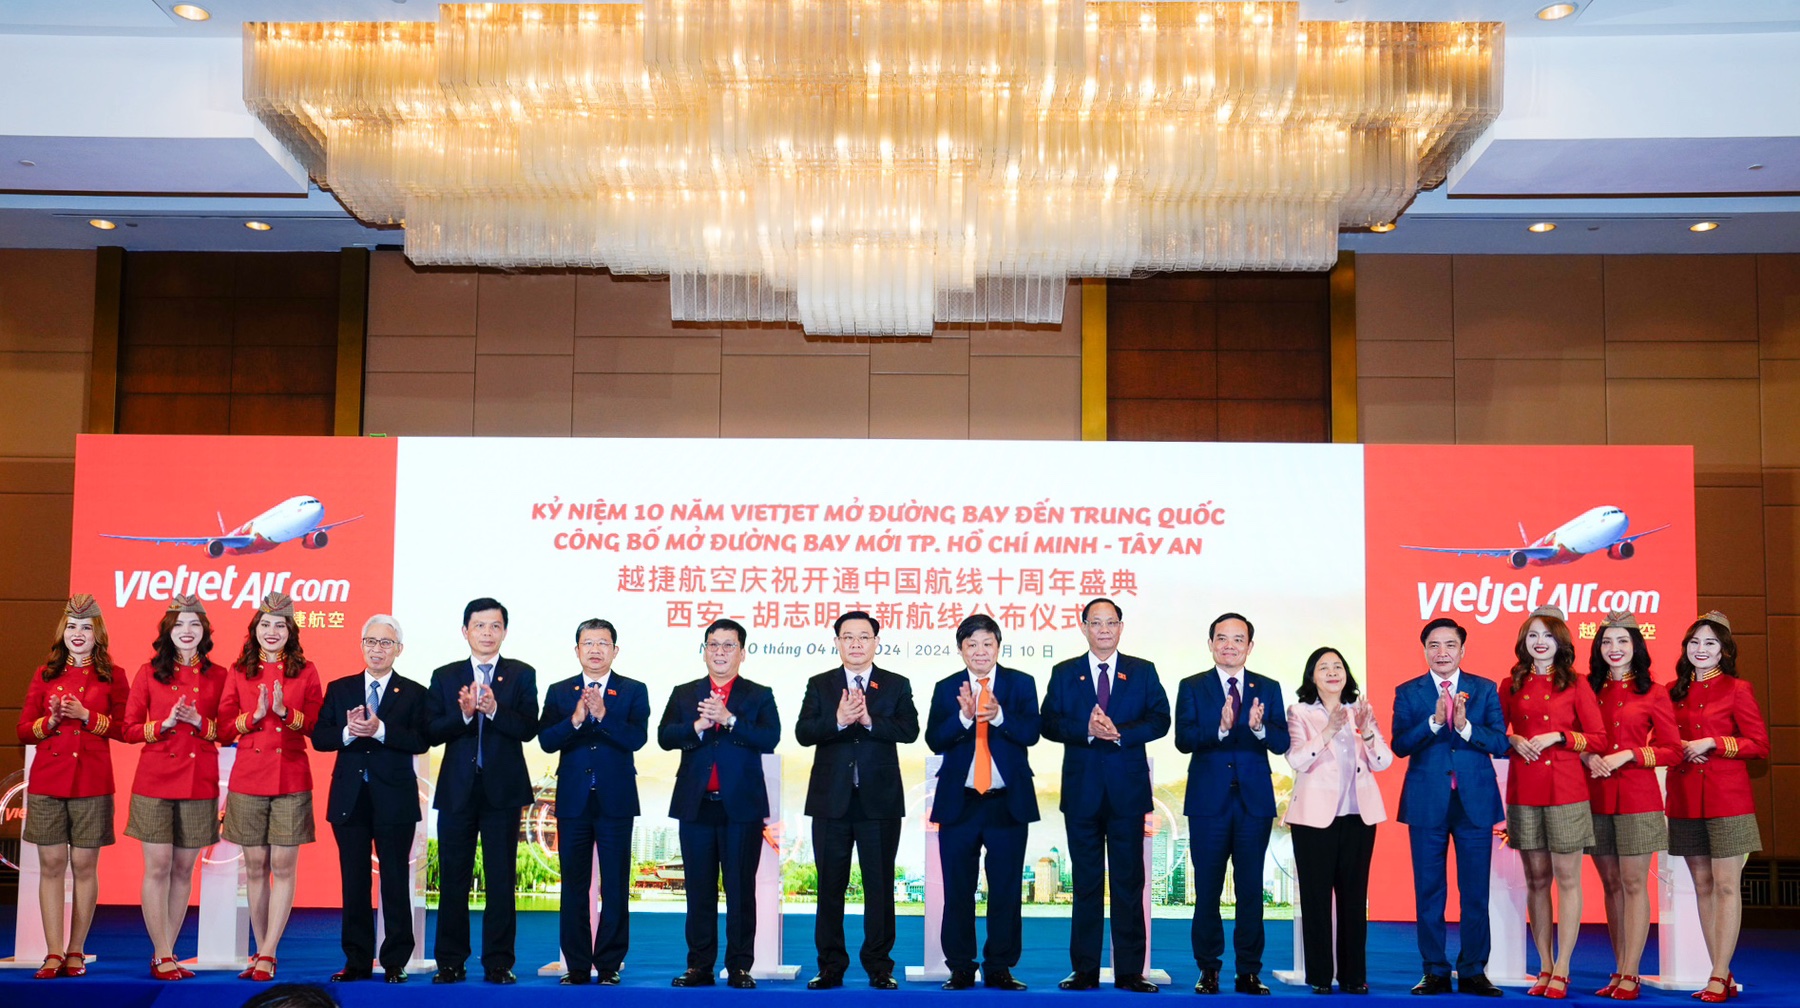 Vietjet’s_ceremony_to_announcement_of_Ho_Chi_Minh_City_–_Xi’an_new